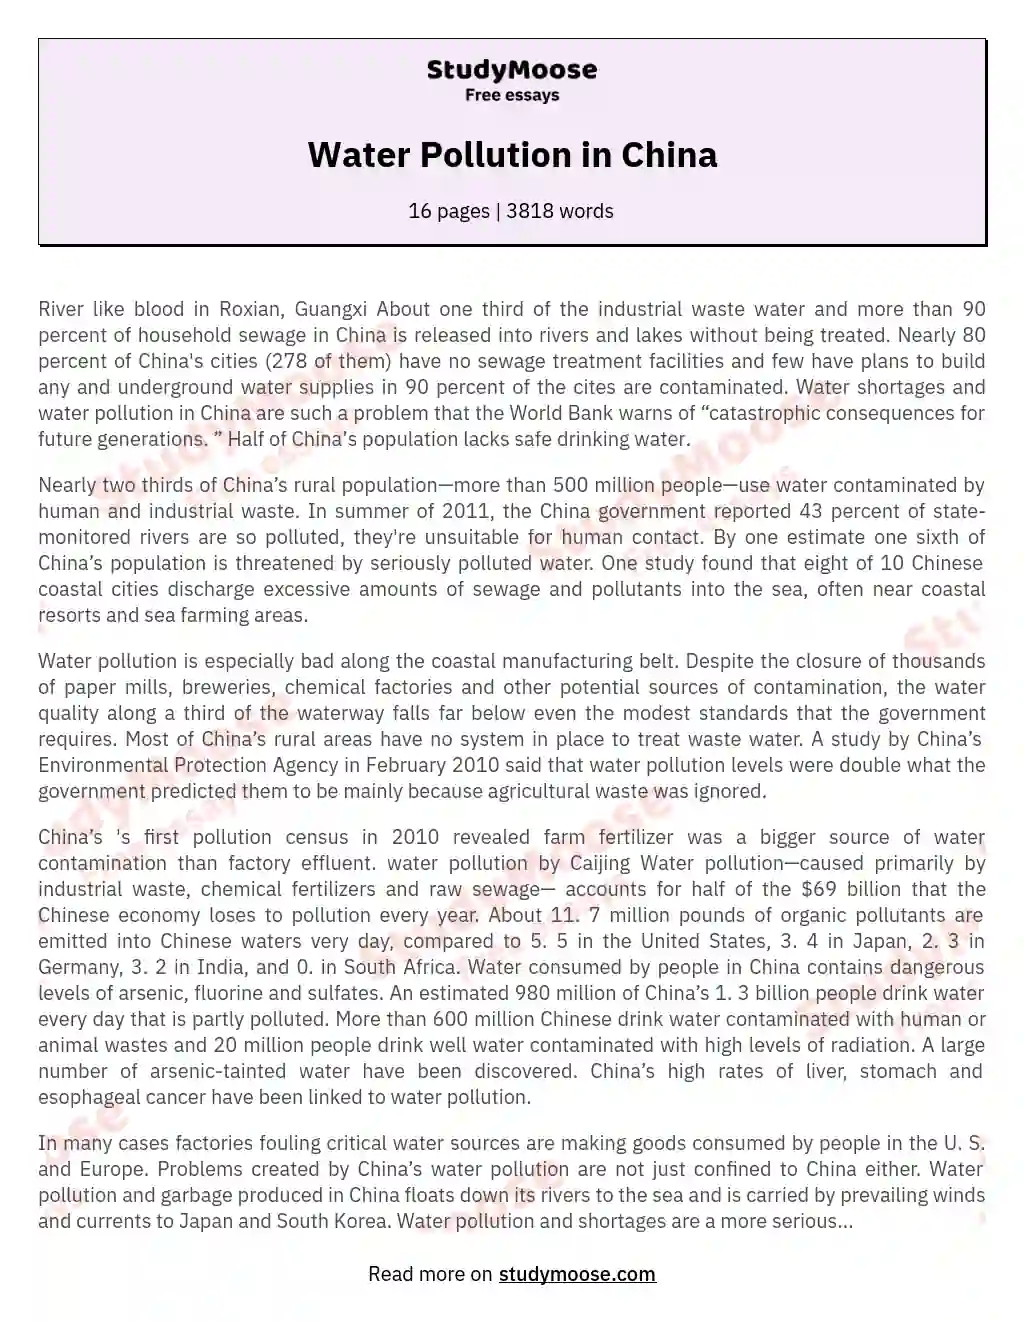 Water Pollution in China essay